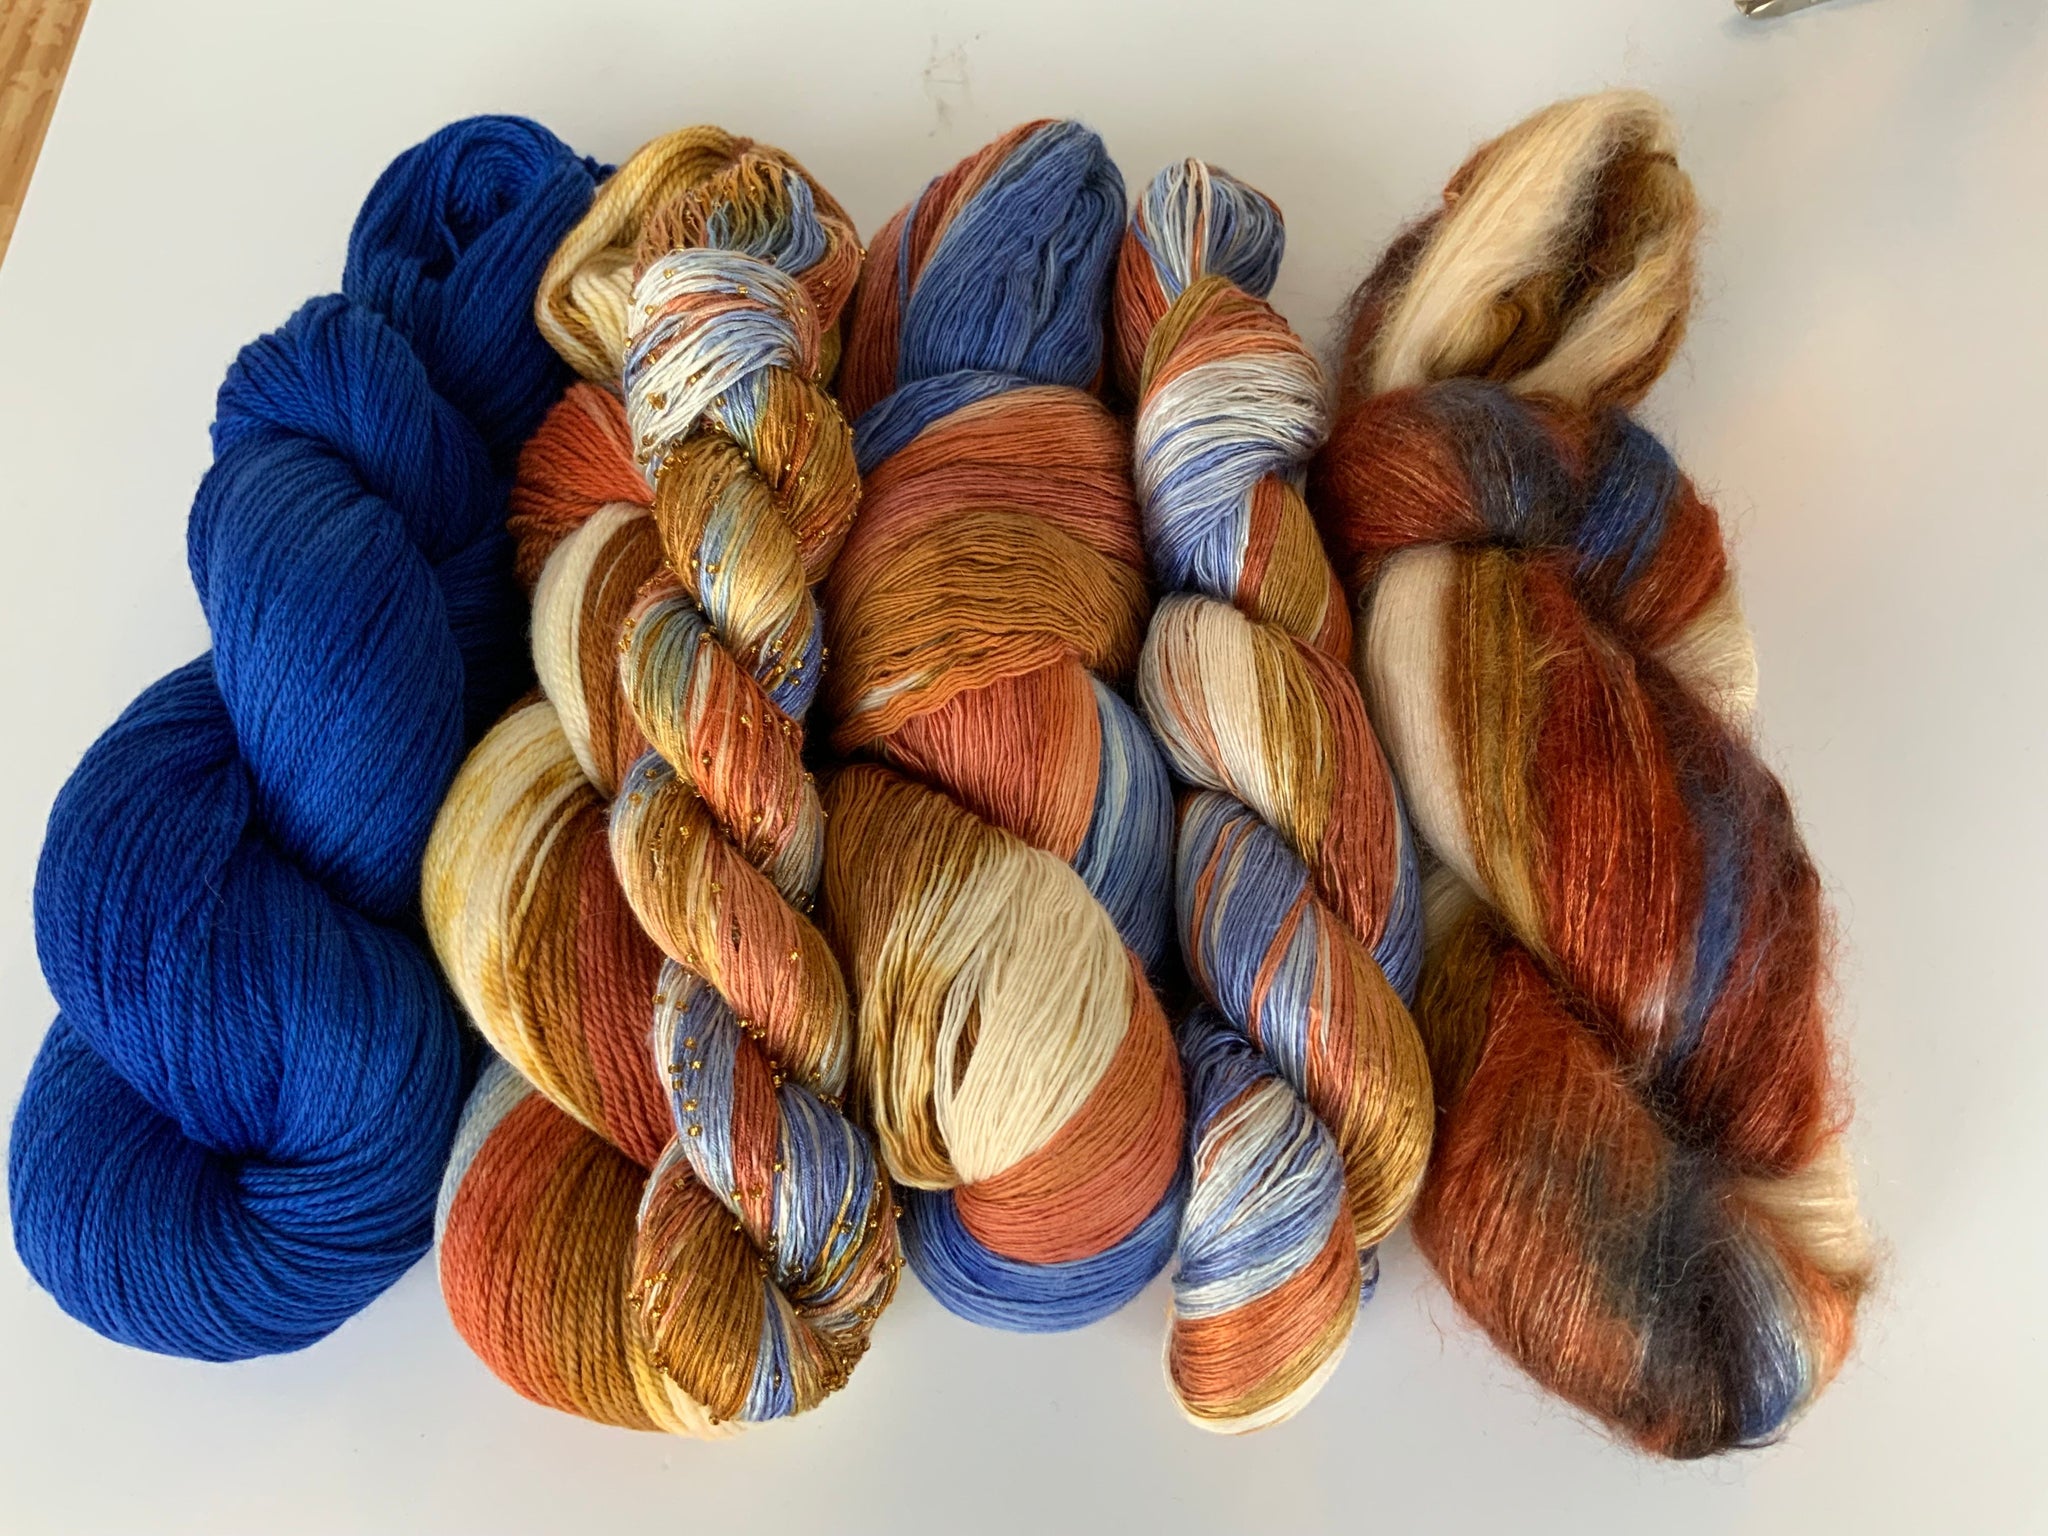 ARTYARNS MARCH 2022 INSPIRATION COLOR -THE WAVE